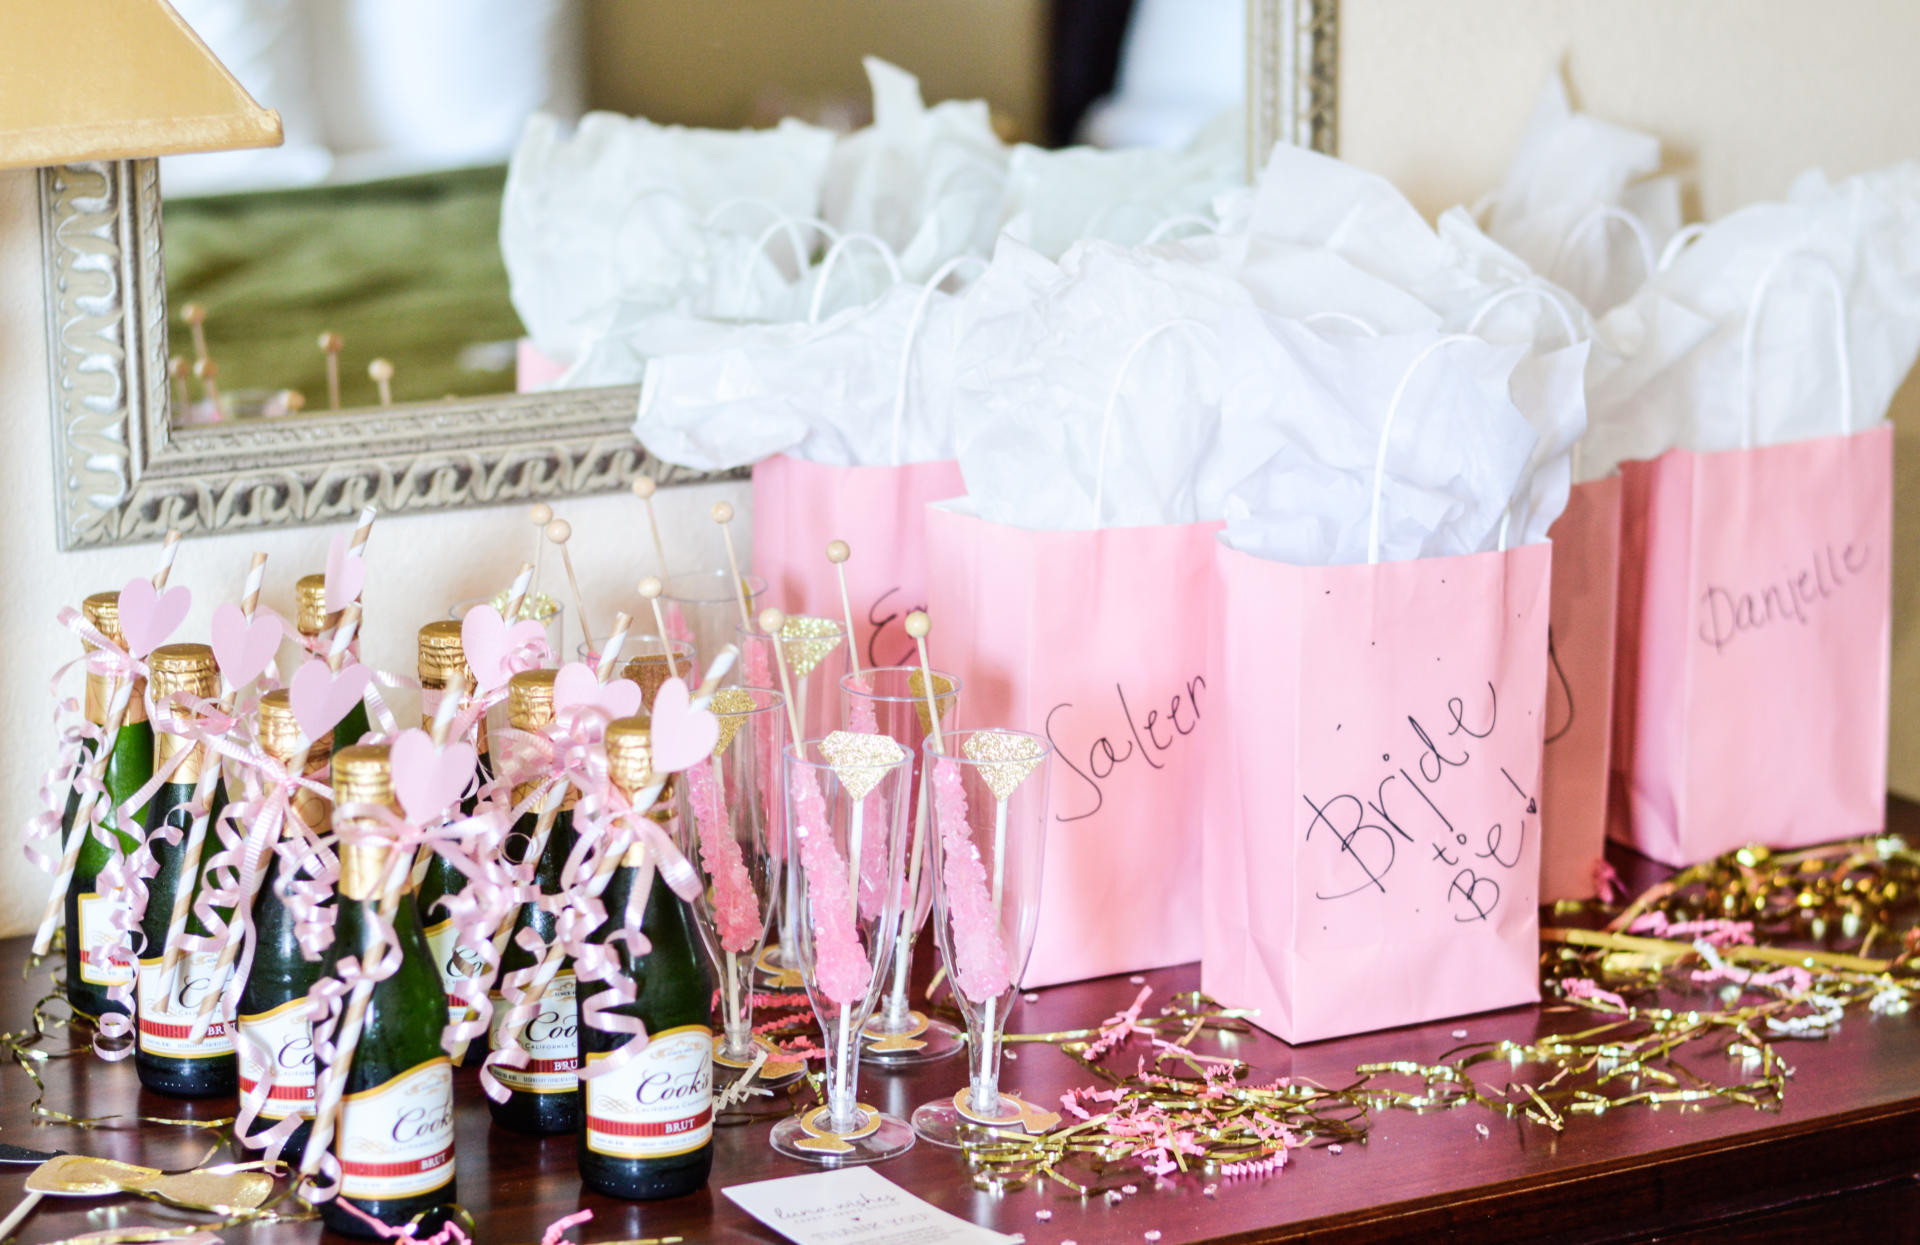 Bachelorette Party Ideas With Minors
 Hotel Bachelorette Party 101